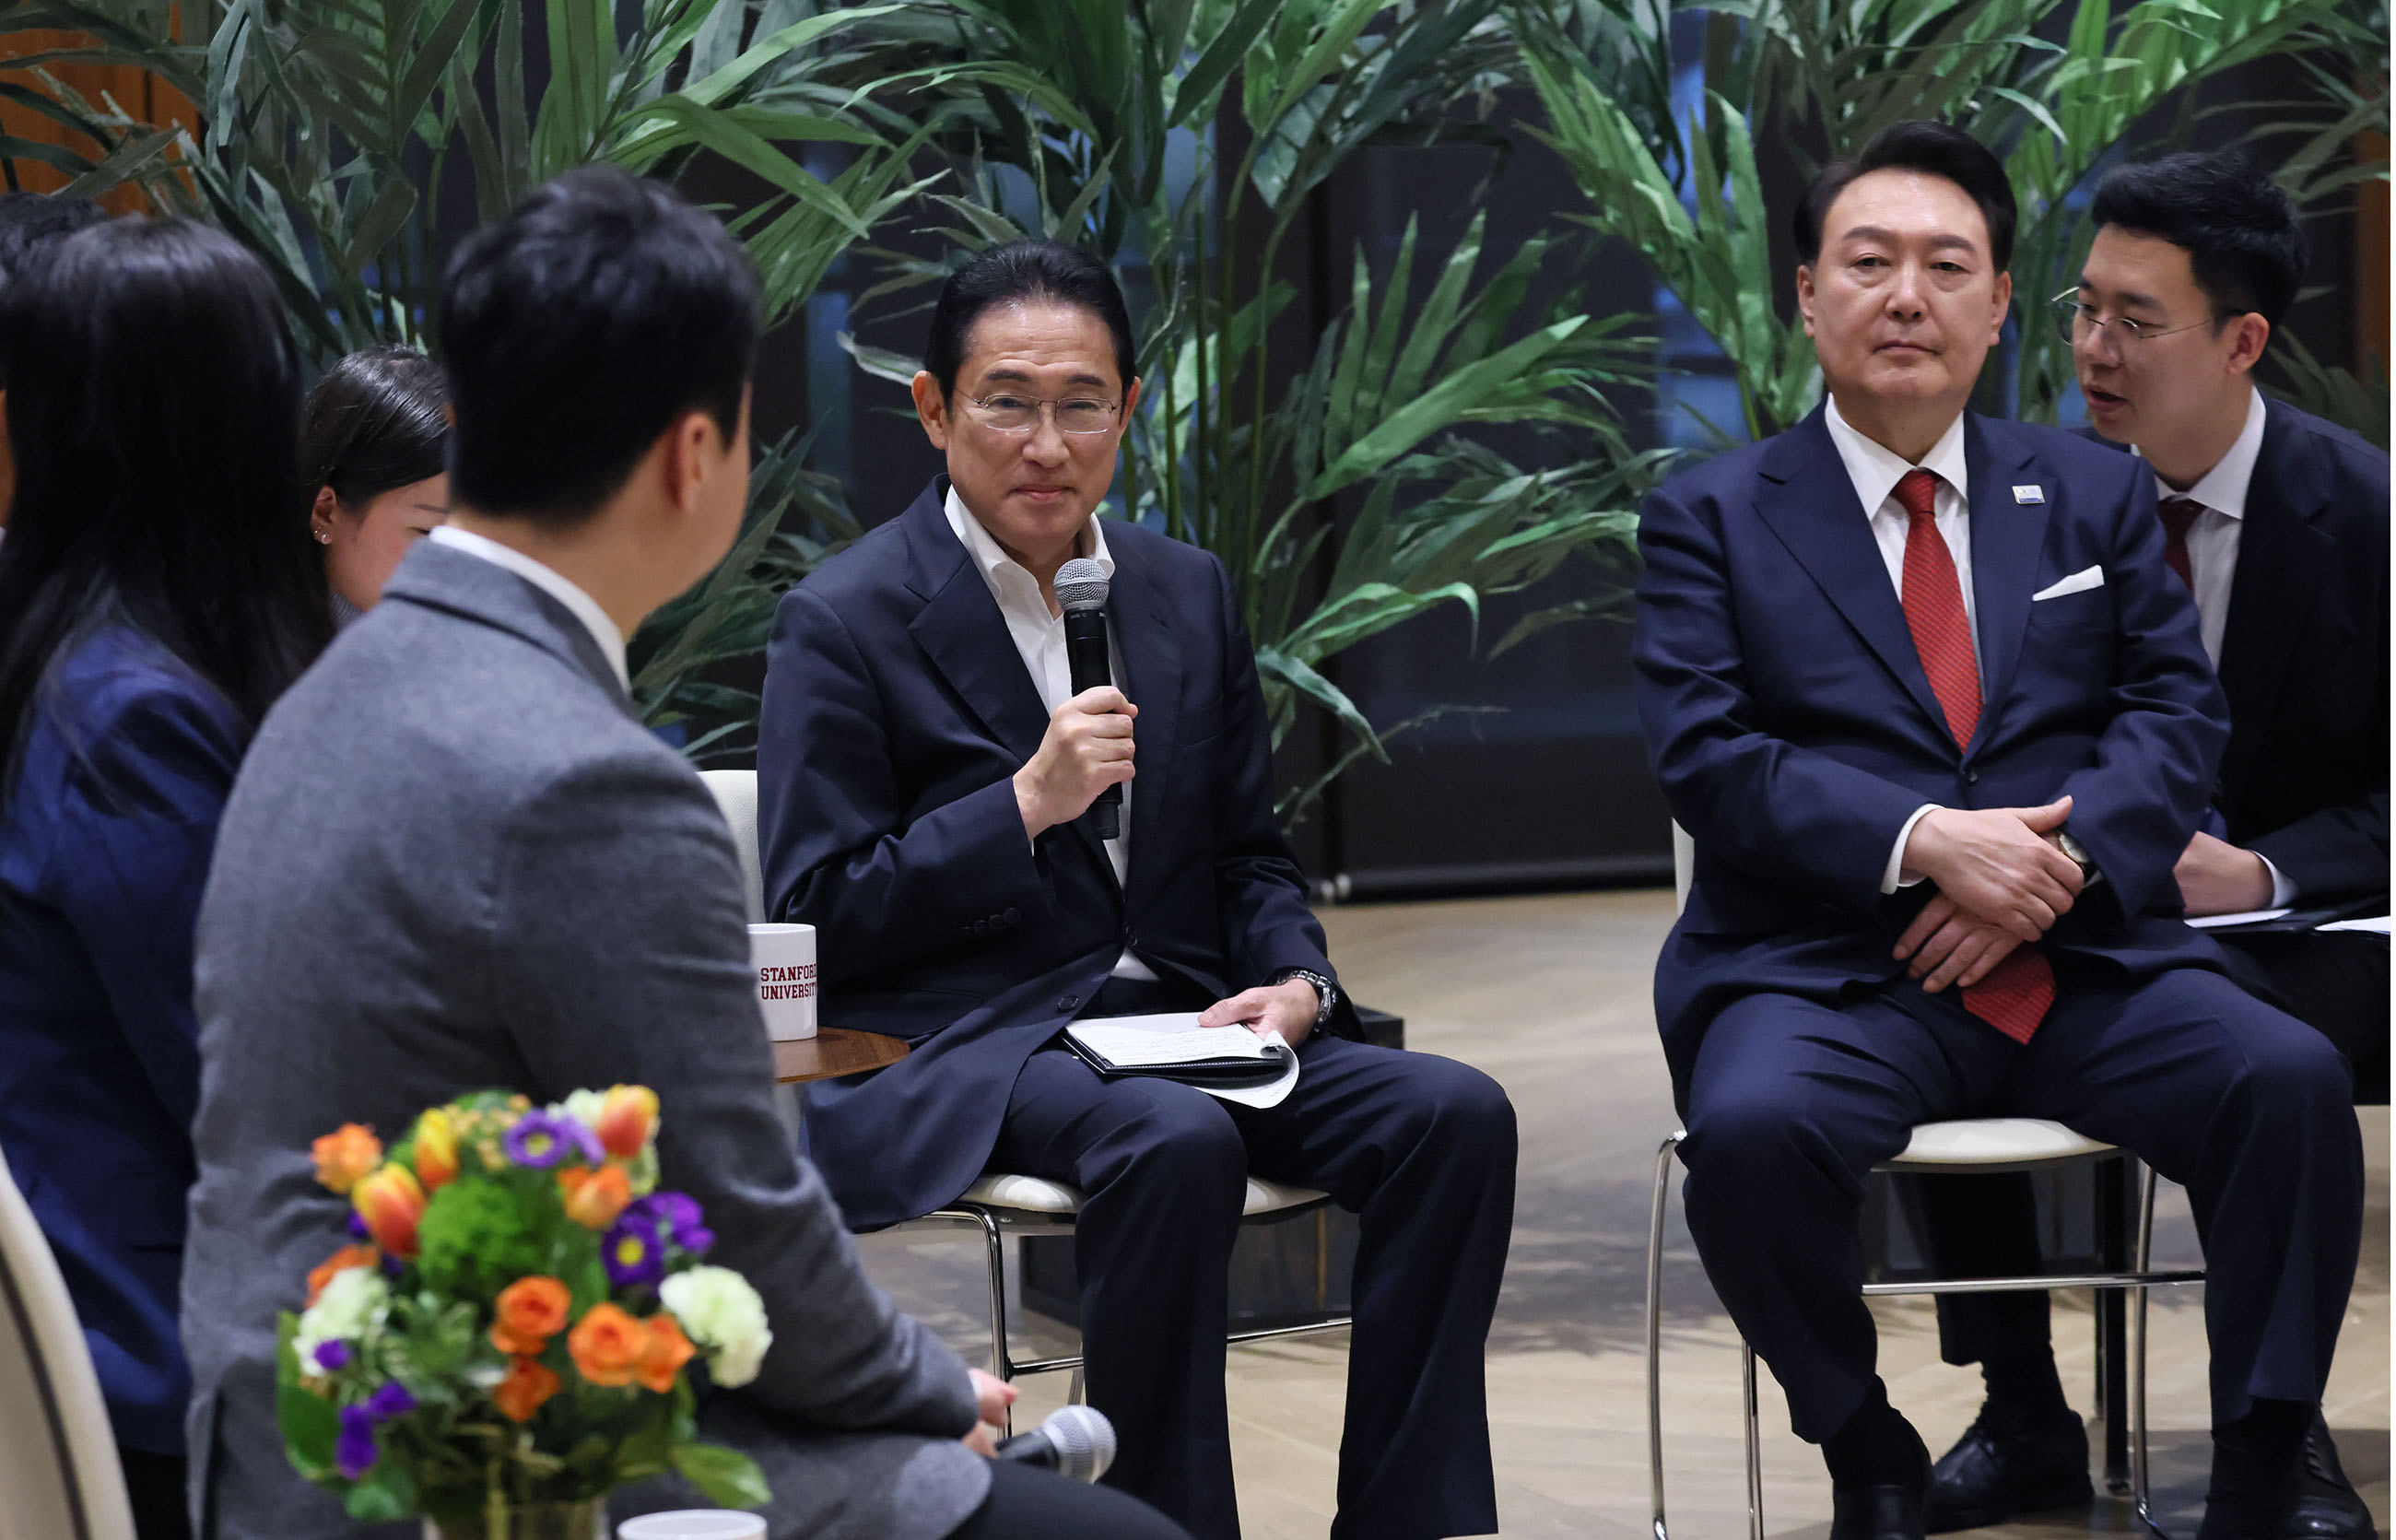 Prime Minister Kishida attending a roundtable with Japanese and Korean startup companies (3)